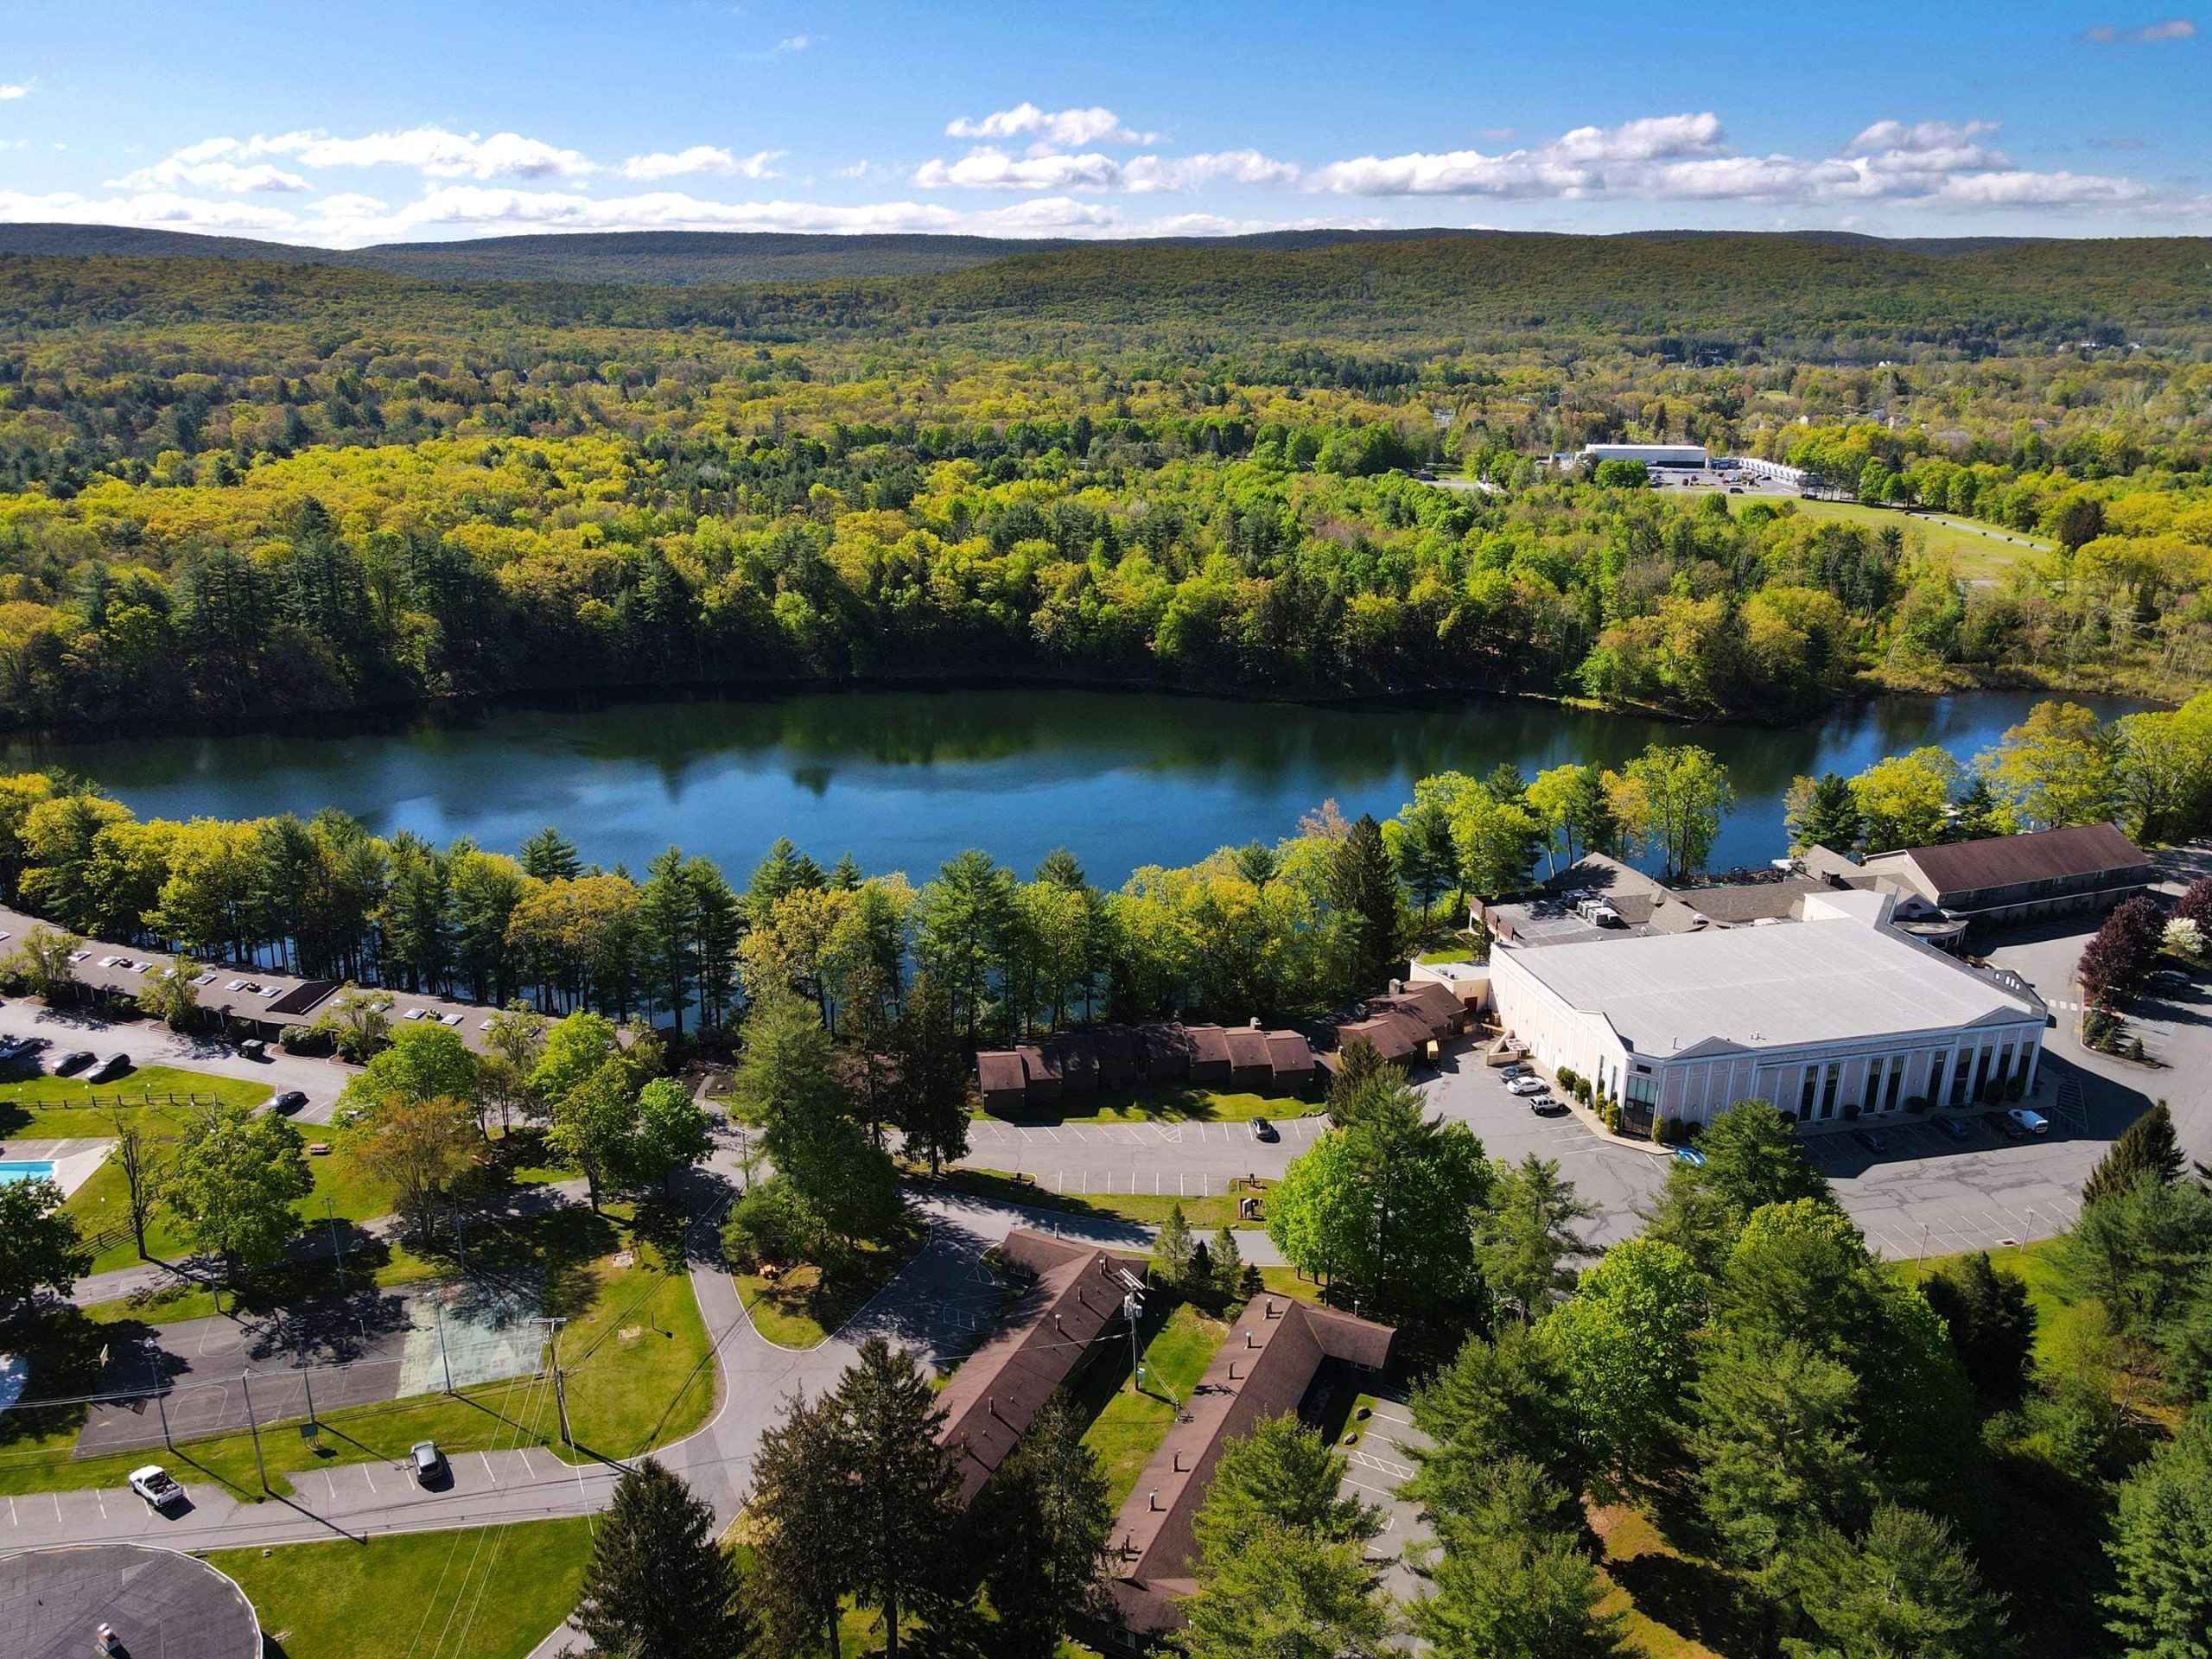 View of the outdoor facilities of the Pocono Palace Resort